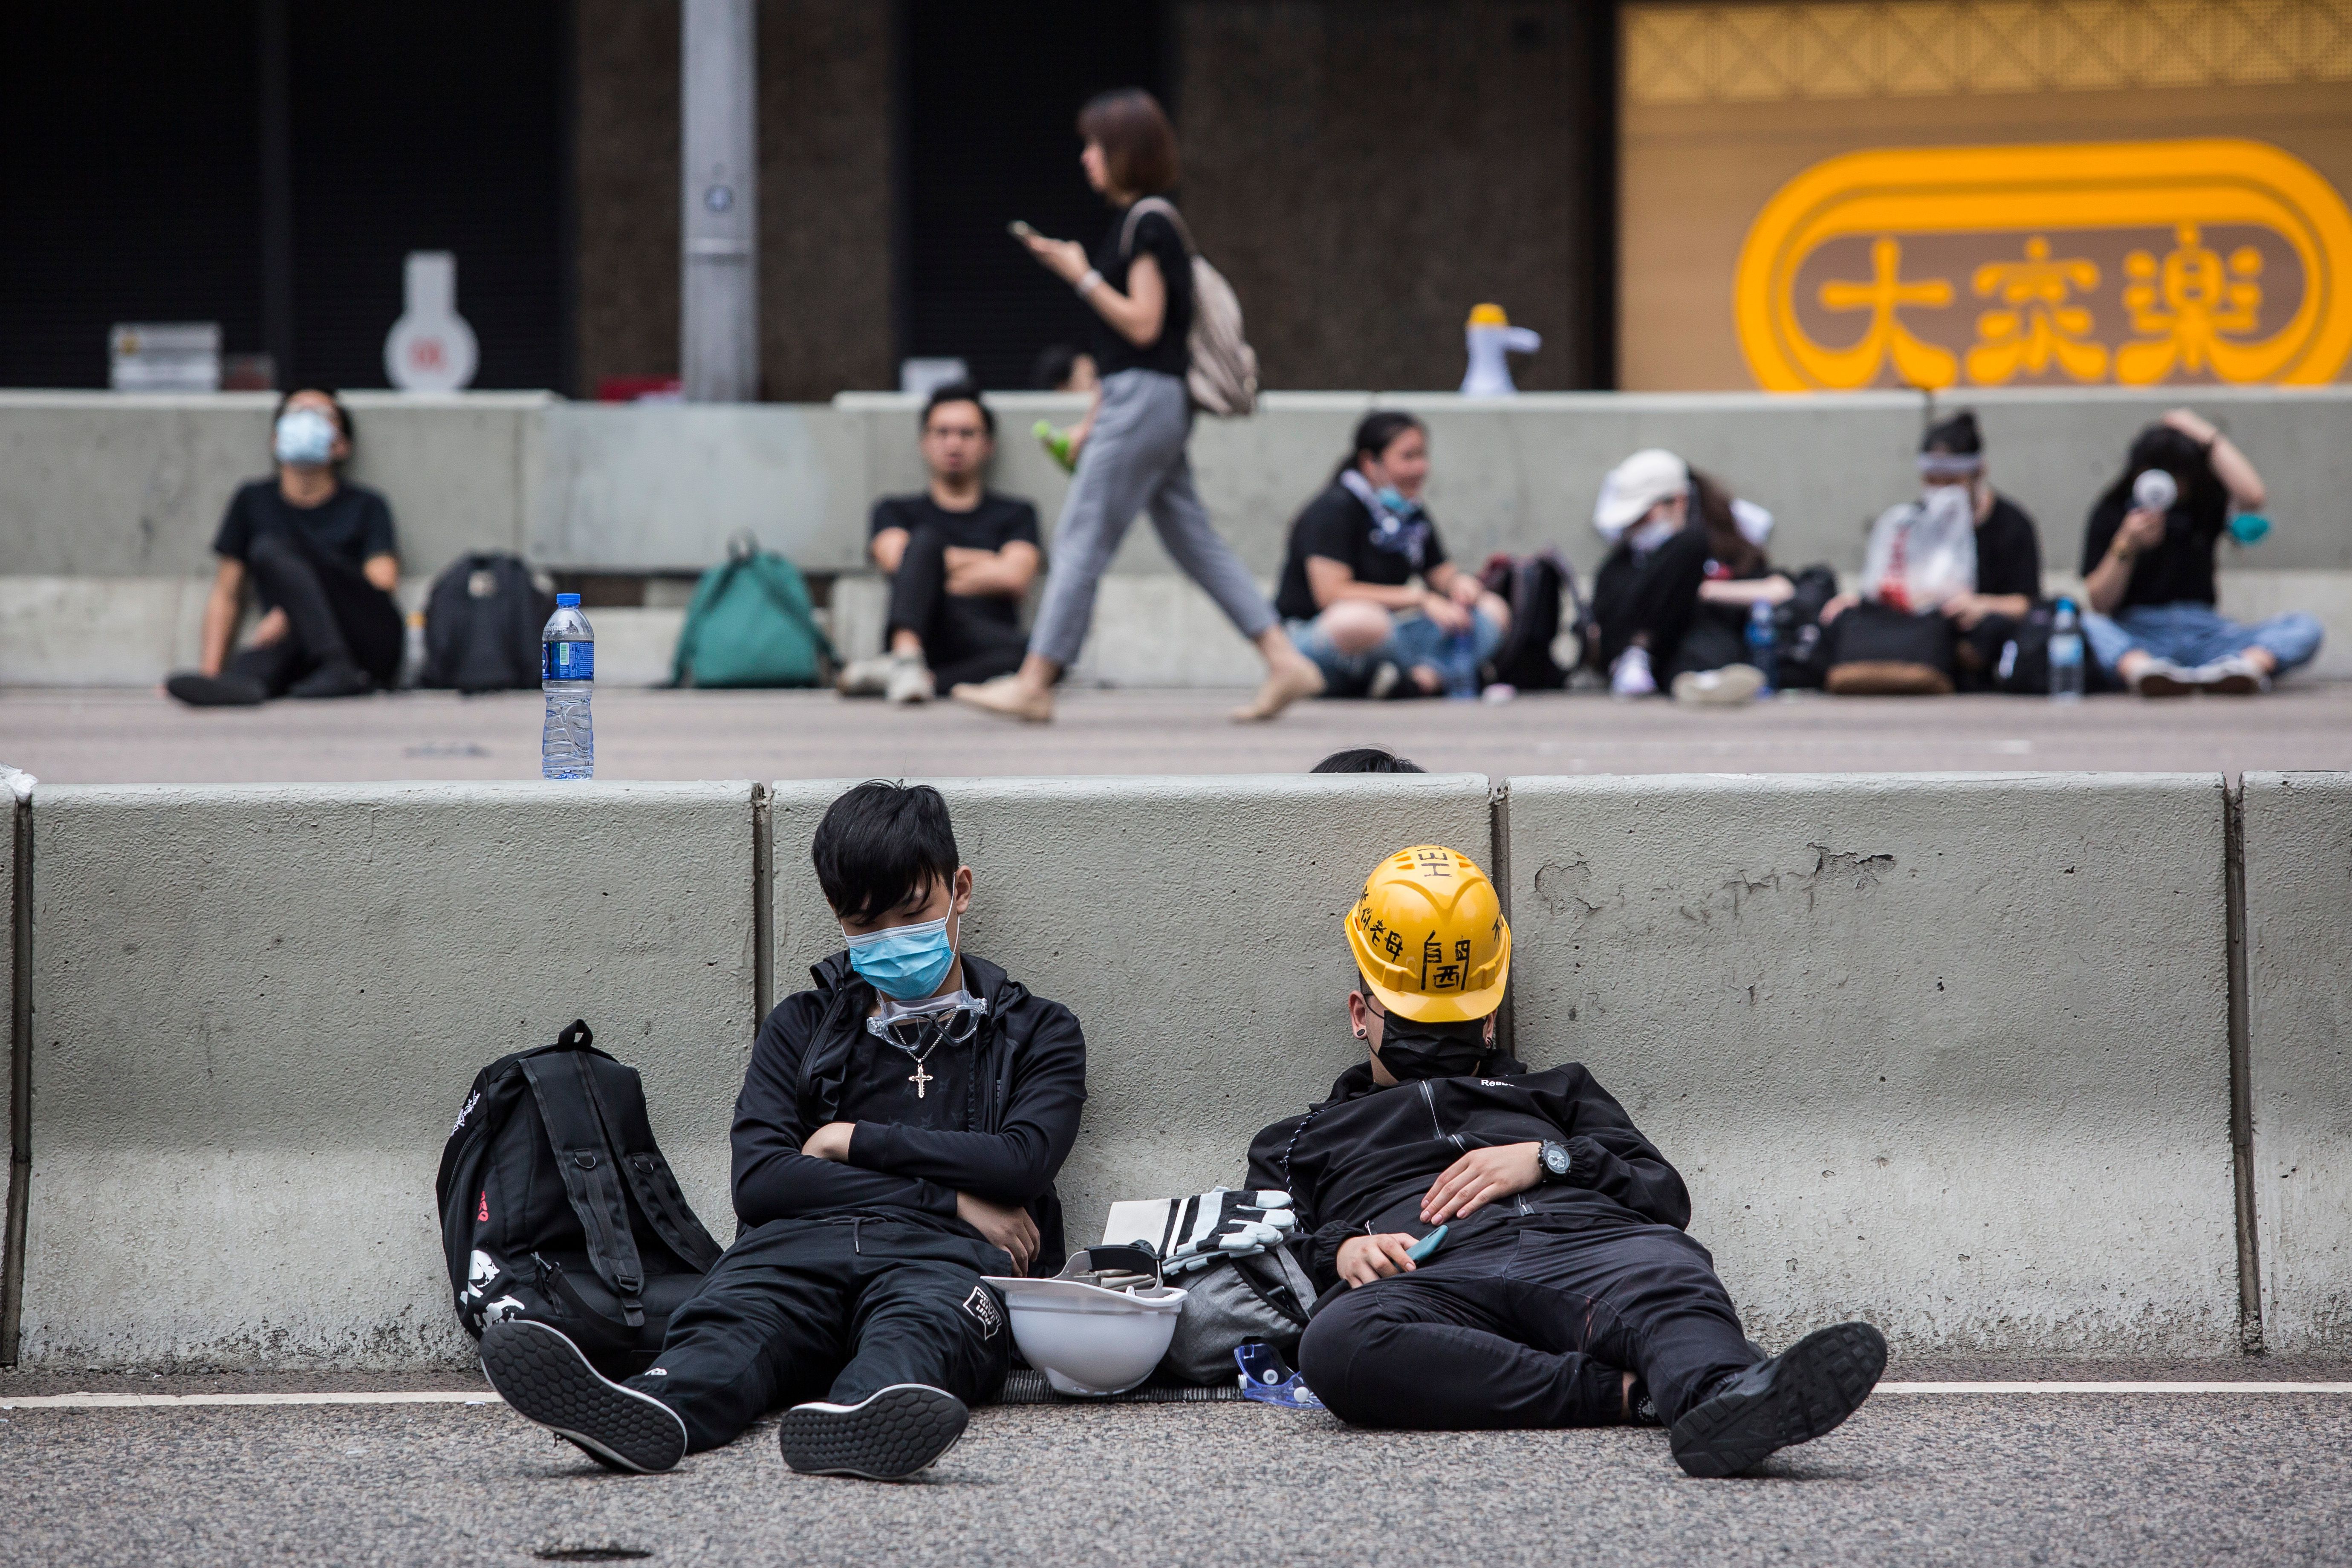 Protesters sleep on a road as they rally against a controversial extradition bill in Hong Kong early on June 17, 2019.